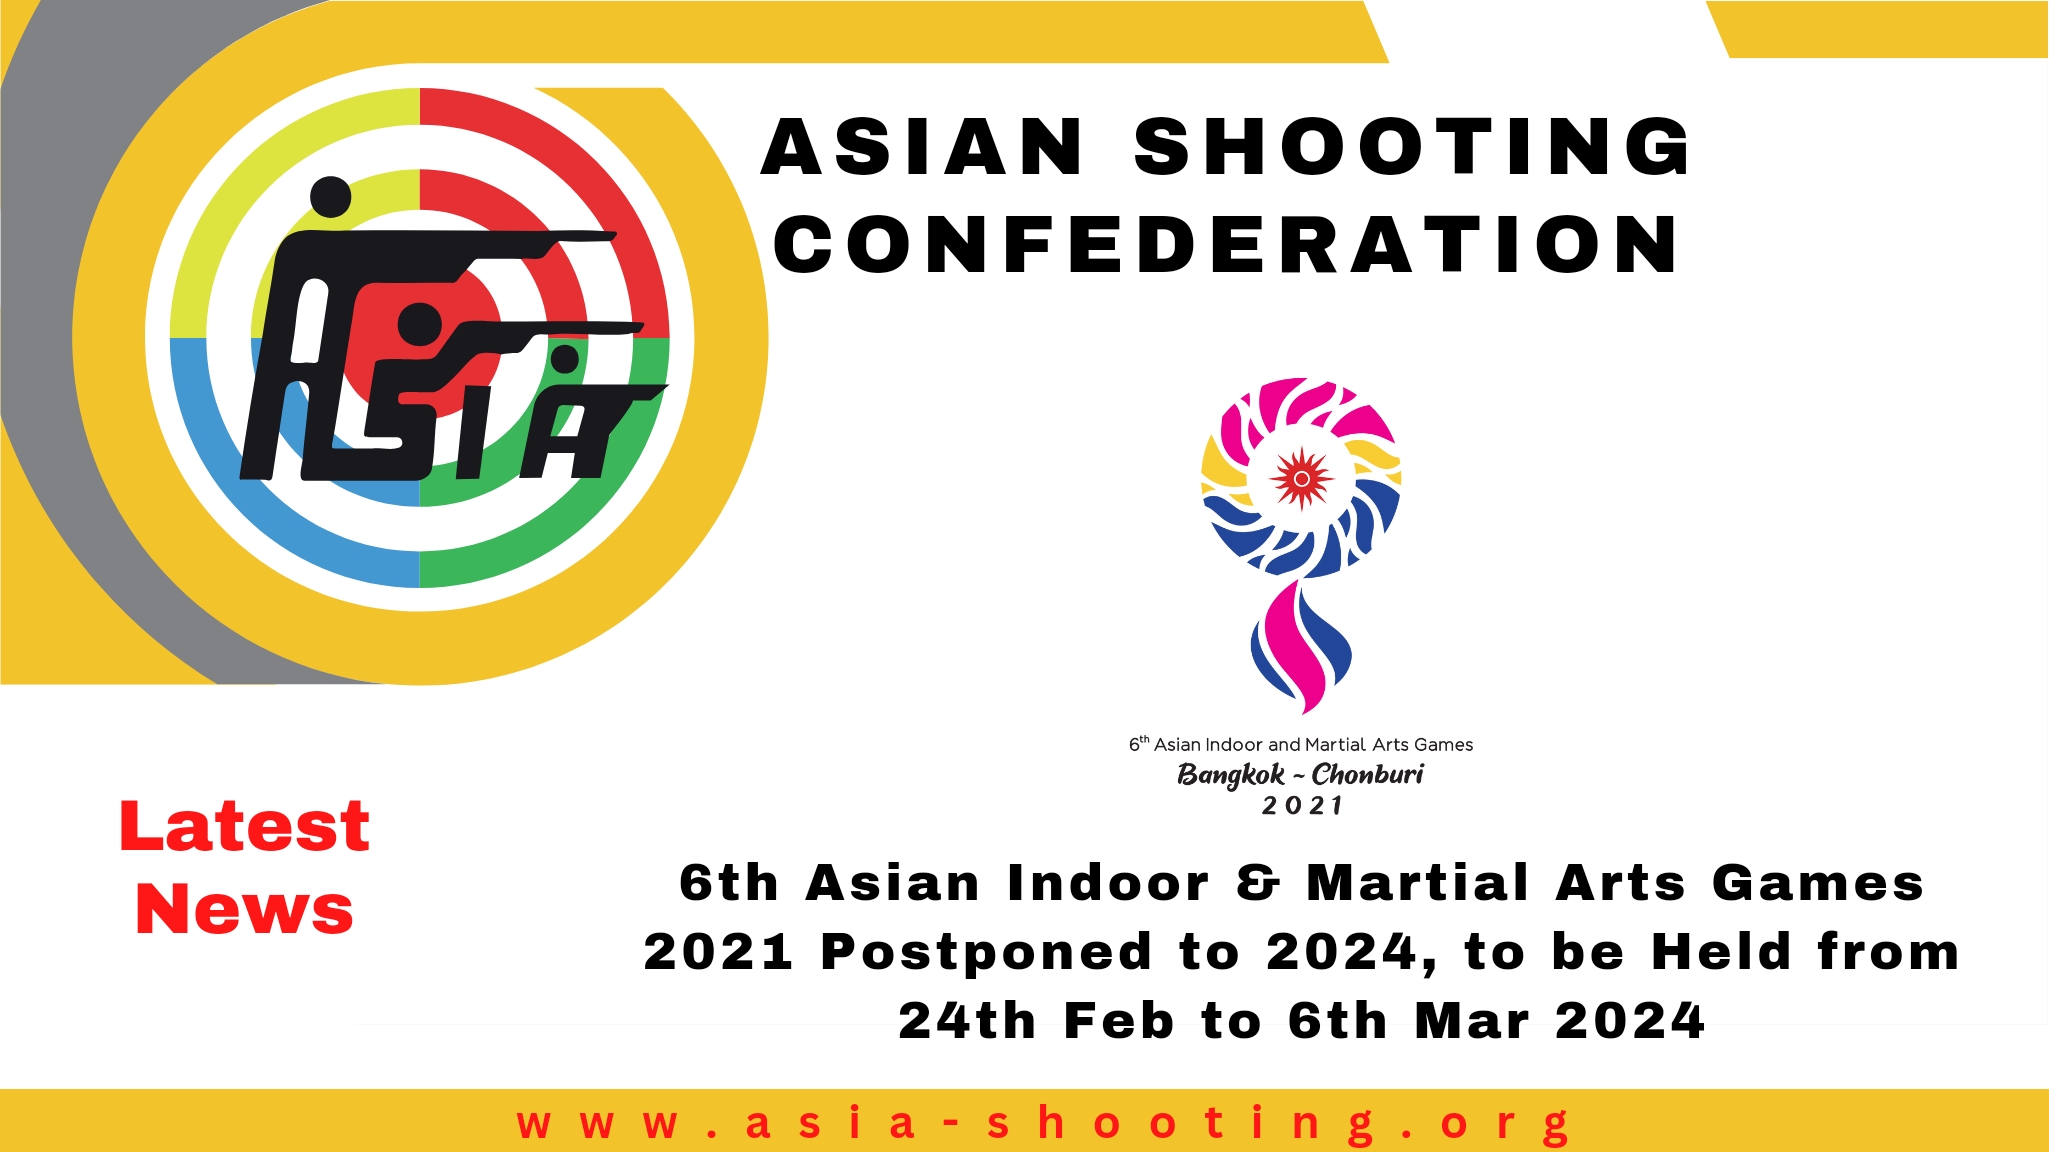 6th Asian Indoor & Martial Arts Games 2021 Postponed to 2024, to be